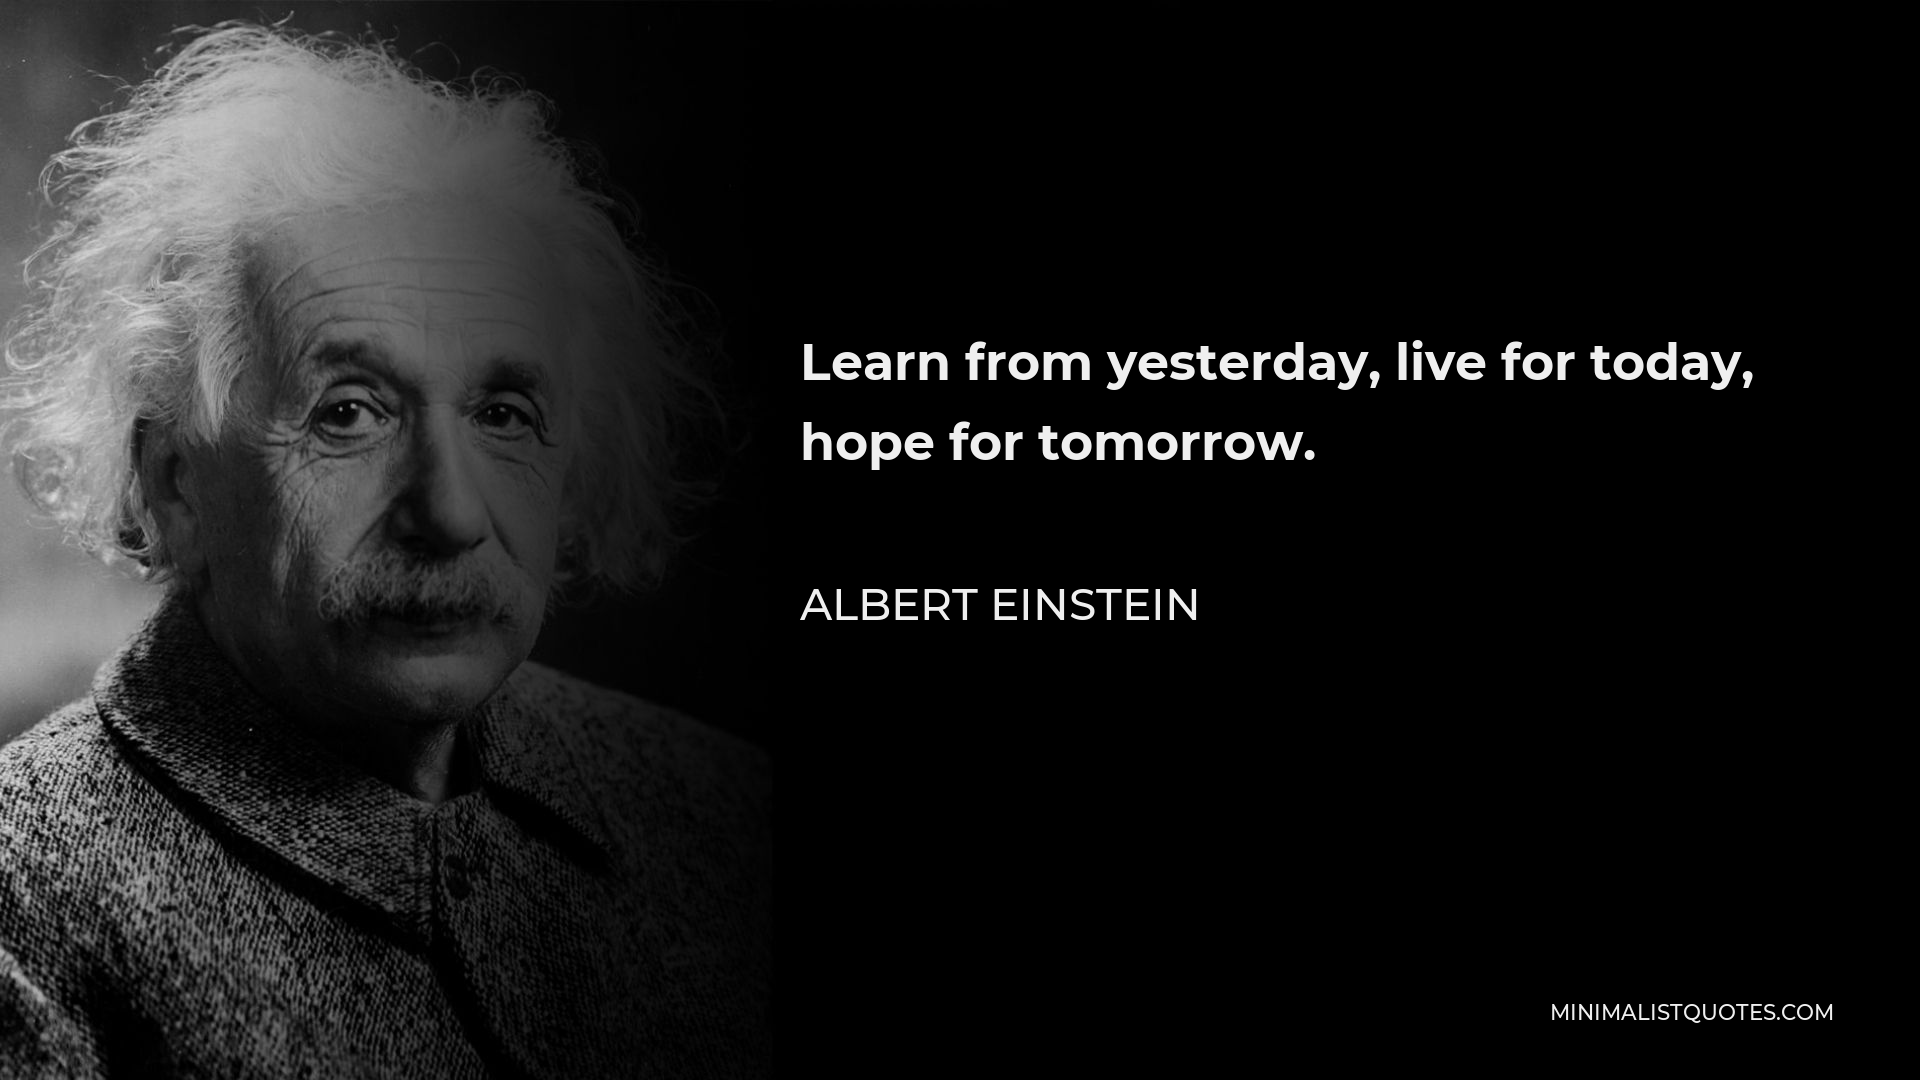 Albert Einstein Quote - Learn from yesterday, live for today, hope for tomorrow.